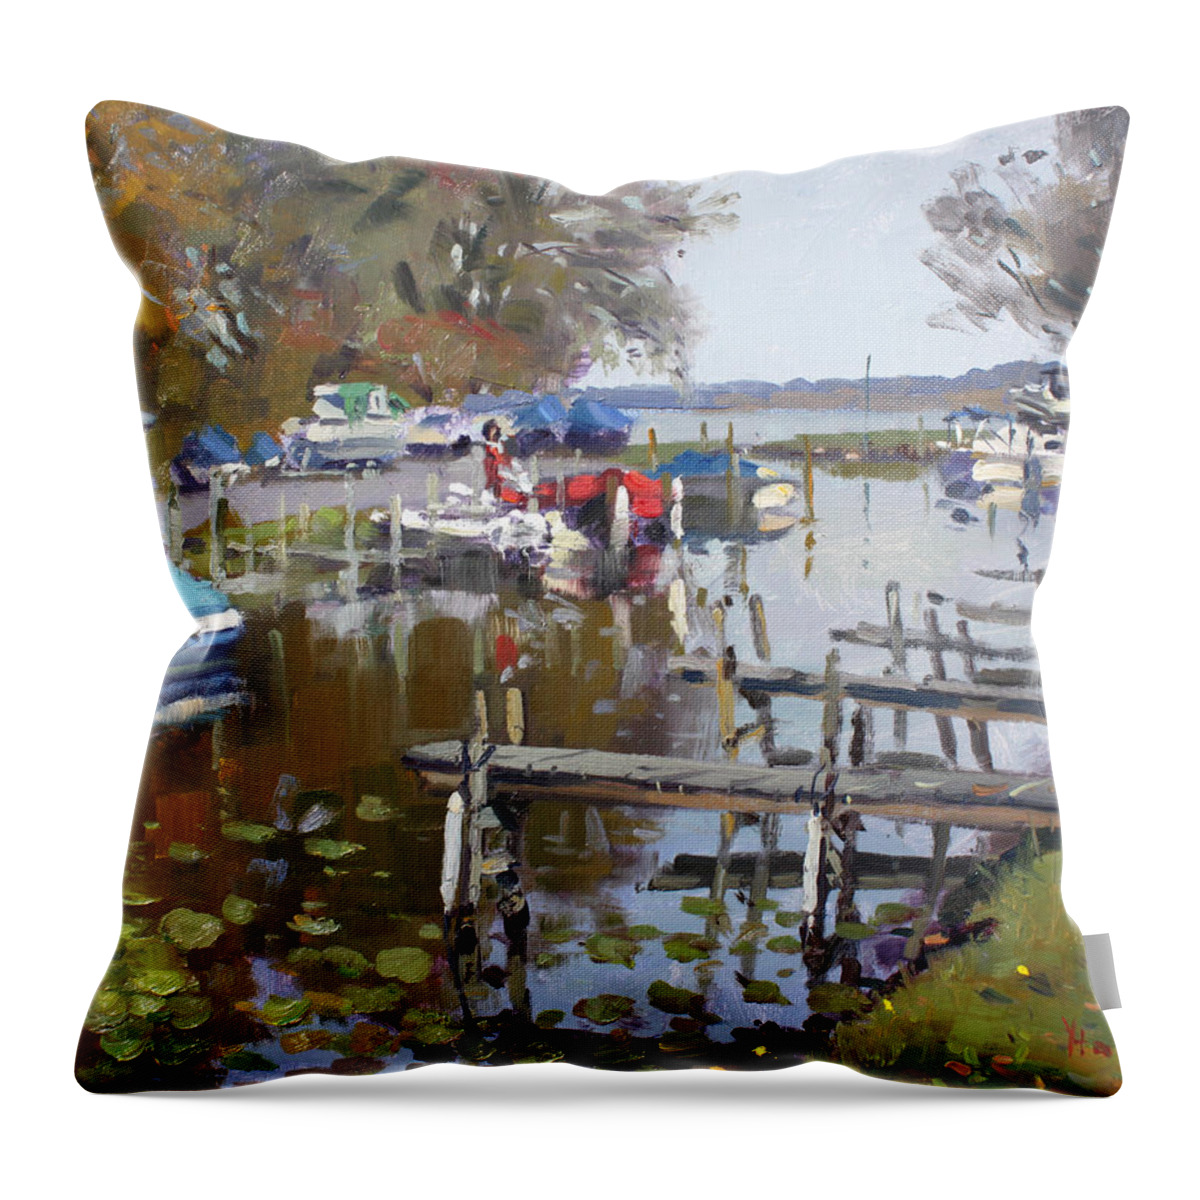 Ashville Throw Pillow featuring the painting Ashville Bay Marina by Ylli Haruni